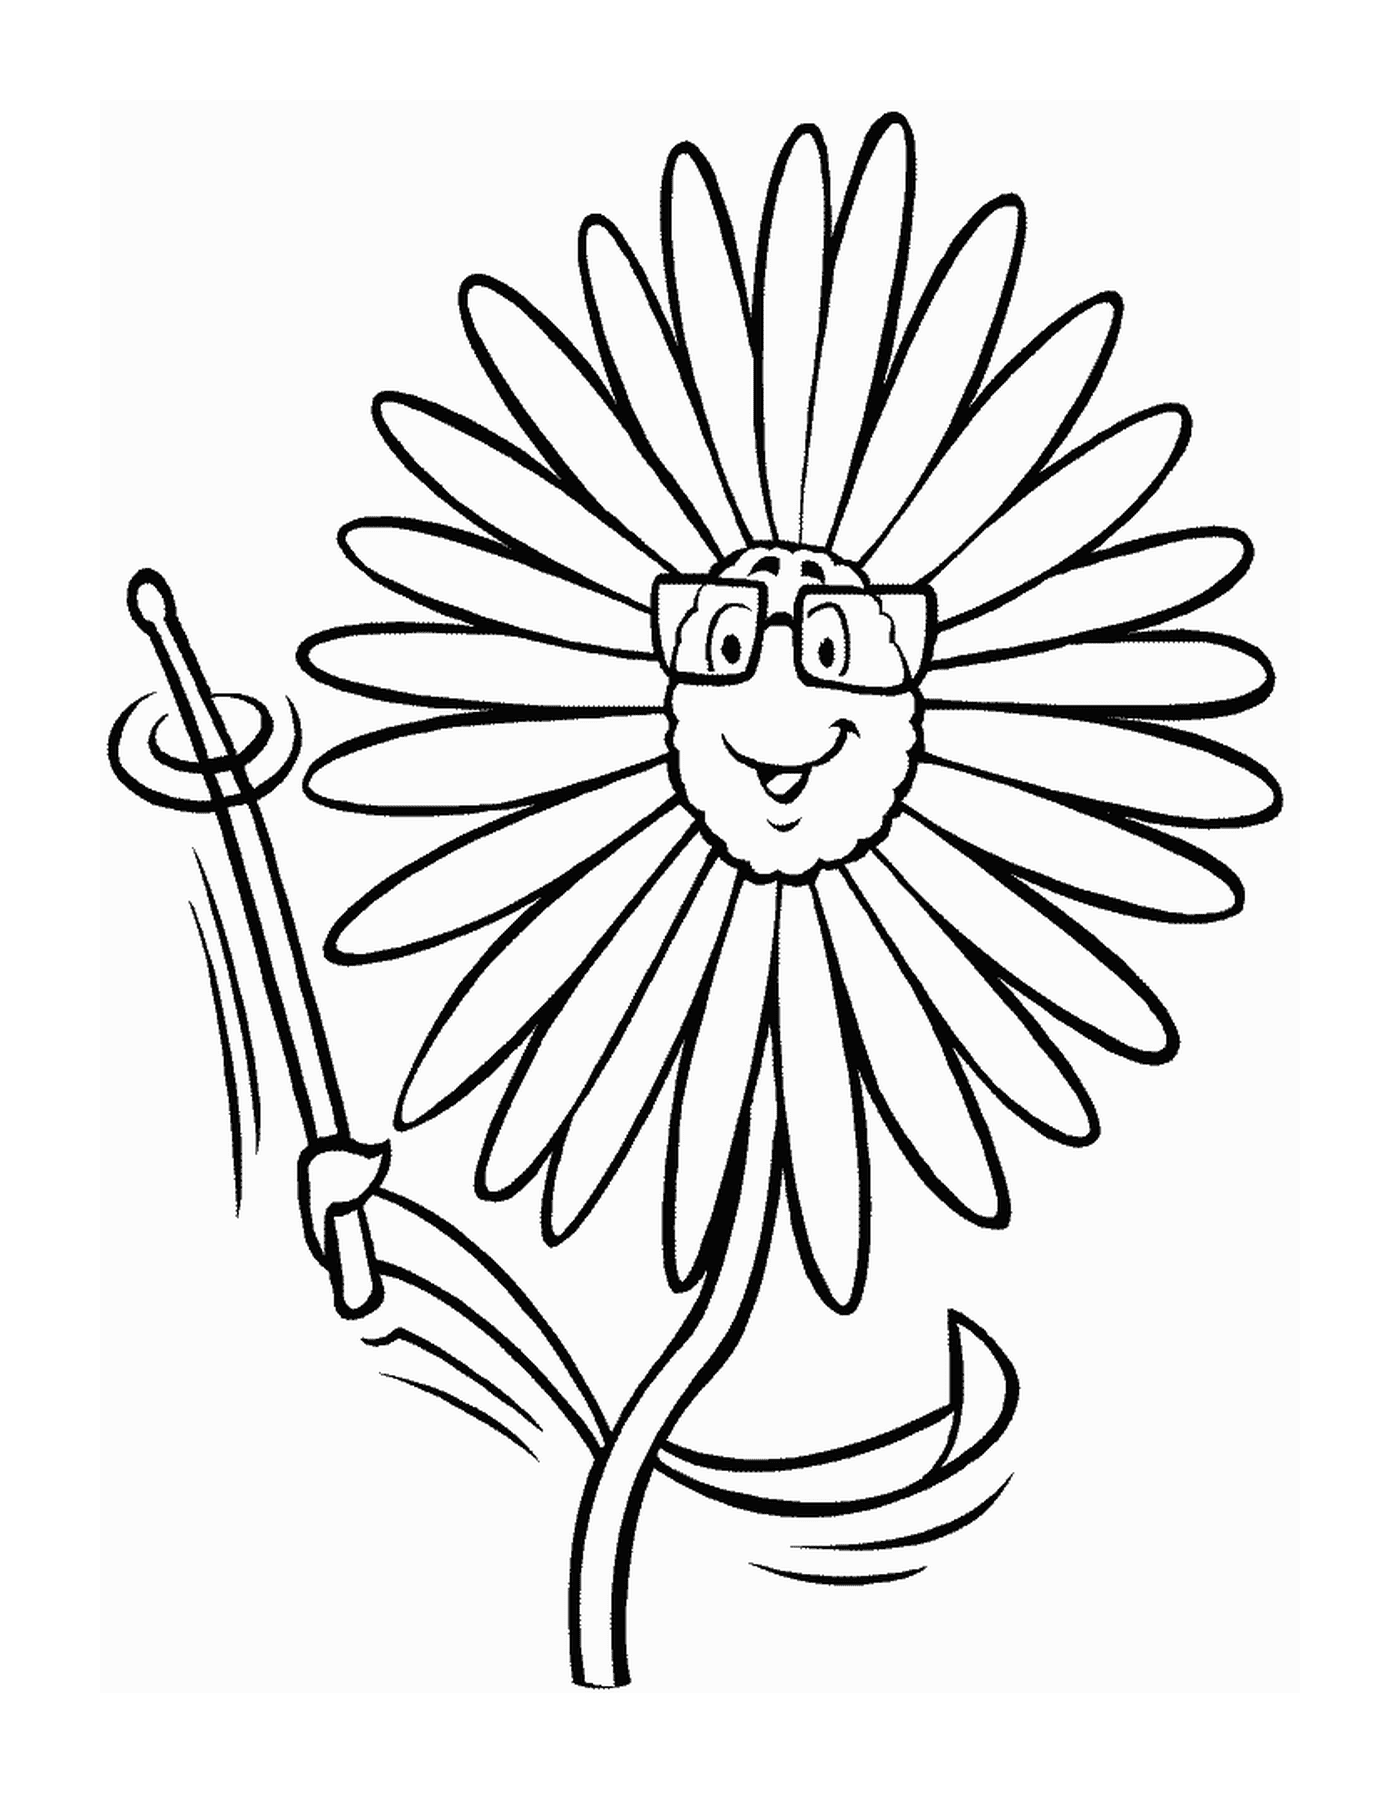  A flower with smiling glasses 